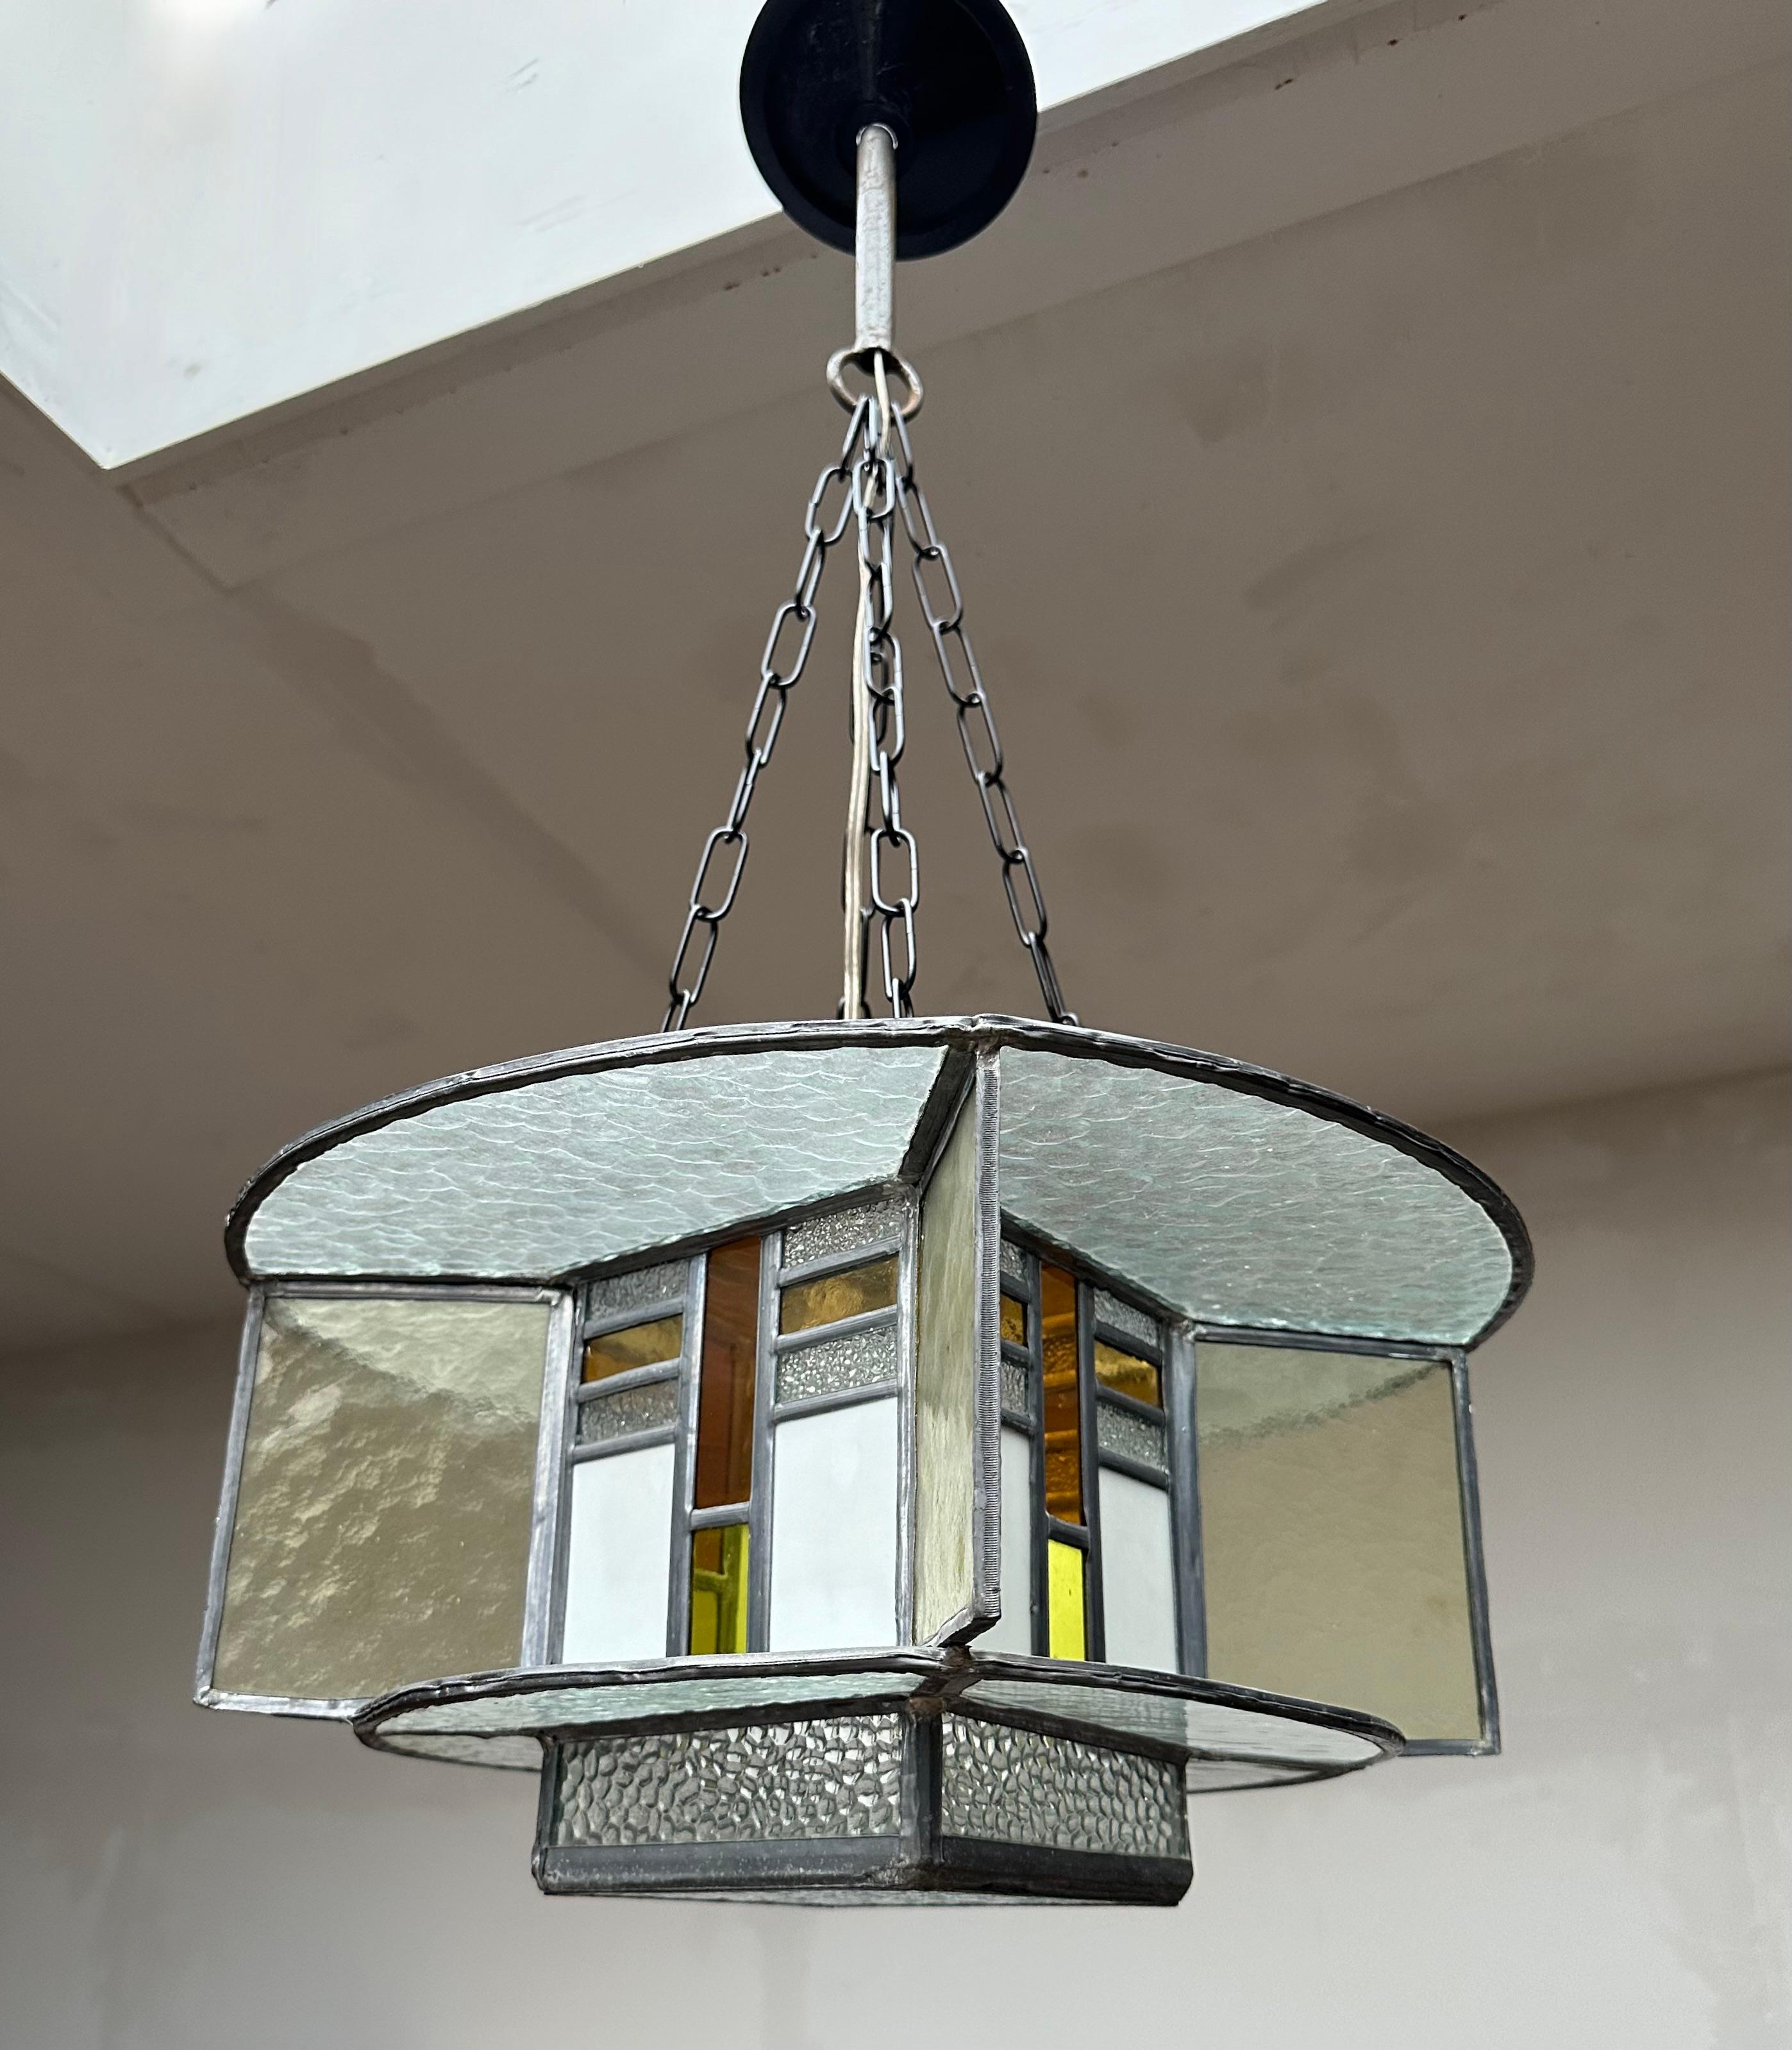 Hand-Crafted Rare Art Deco Pendant / Ceiling Light w. Stain Leaded Glass Shades, Lighting Art For Sale